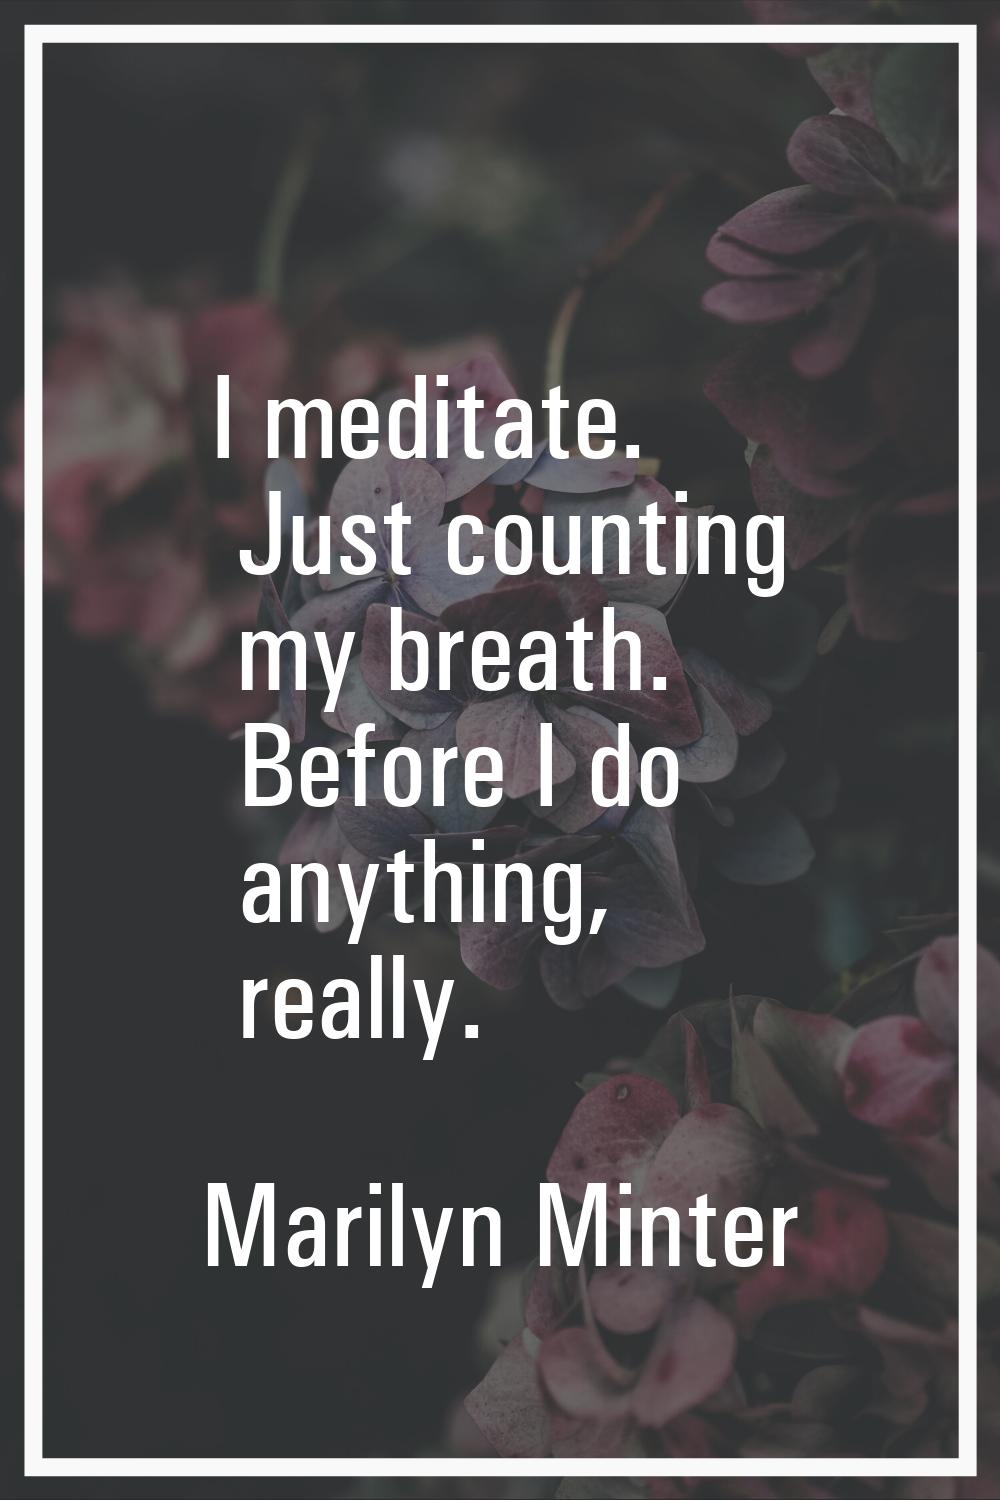 I meditate. Just counting my breath. Before I do anything, really.